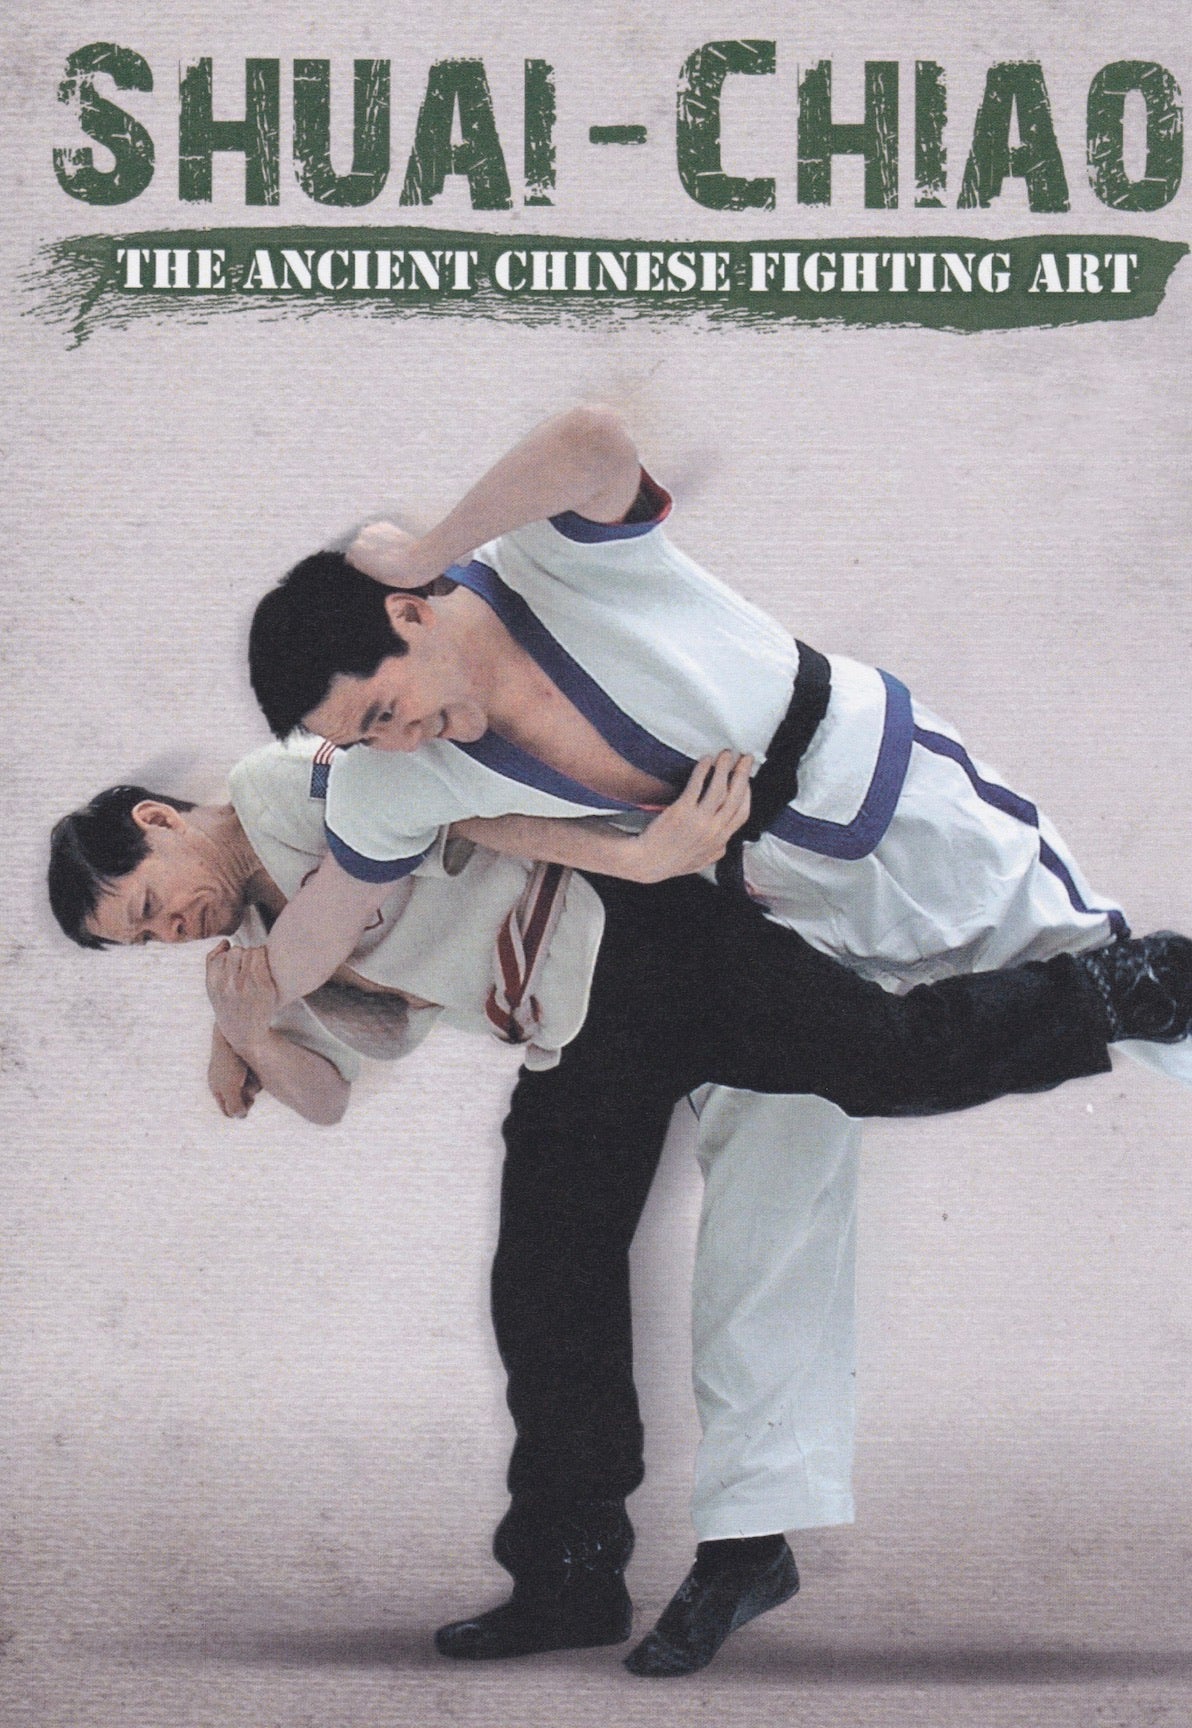 Shuai-Chiao: The Ancient Chinese Fighting Art 3 DVD Set by Daniel Chi-Hsiu Weng - Budovideos